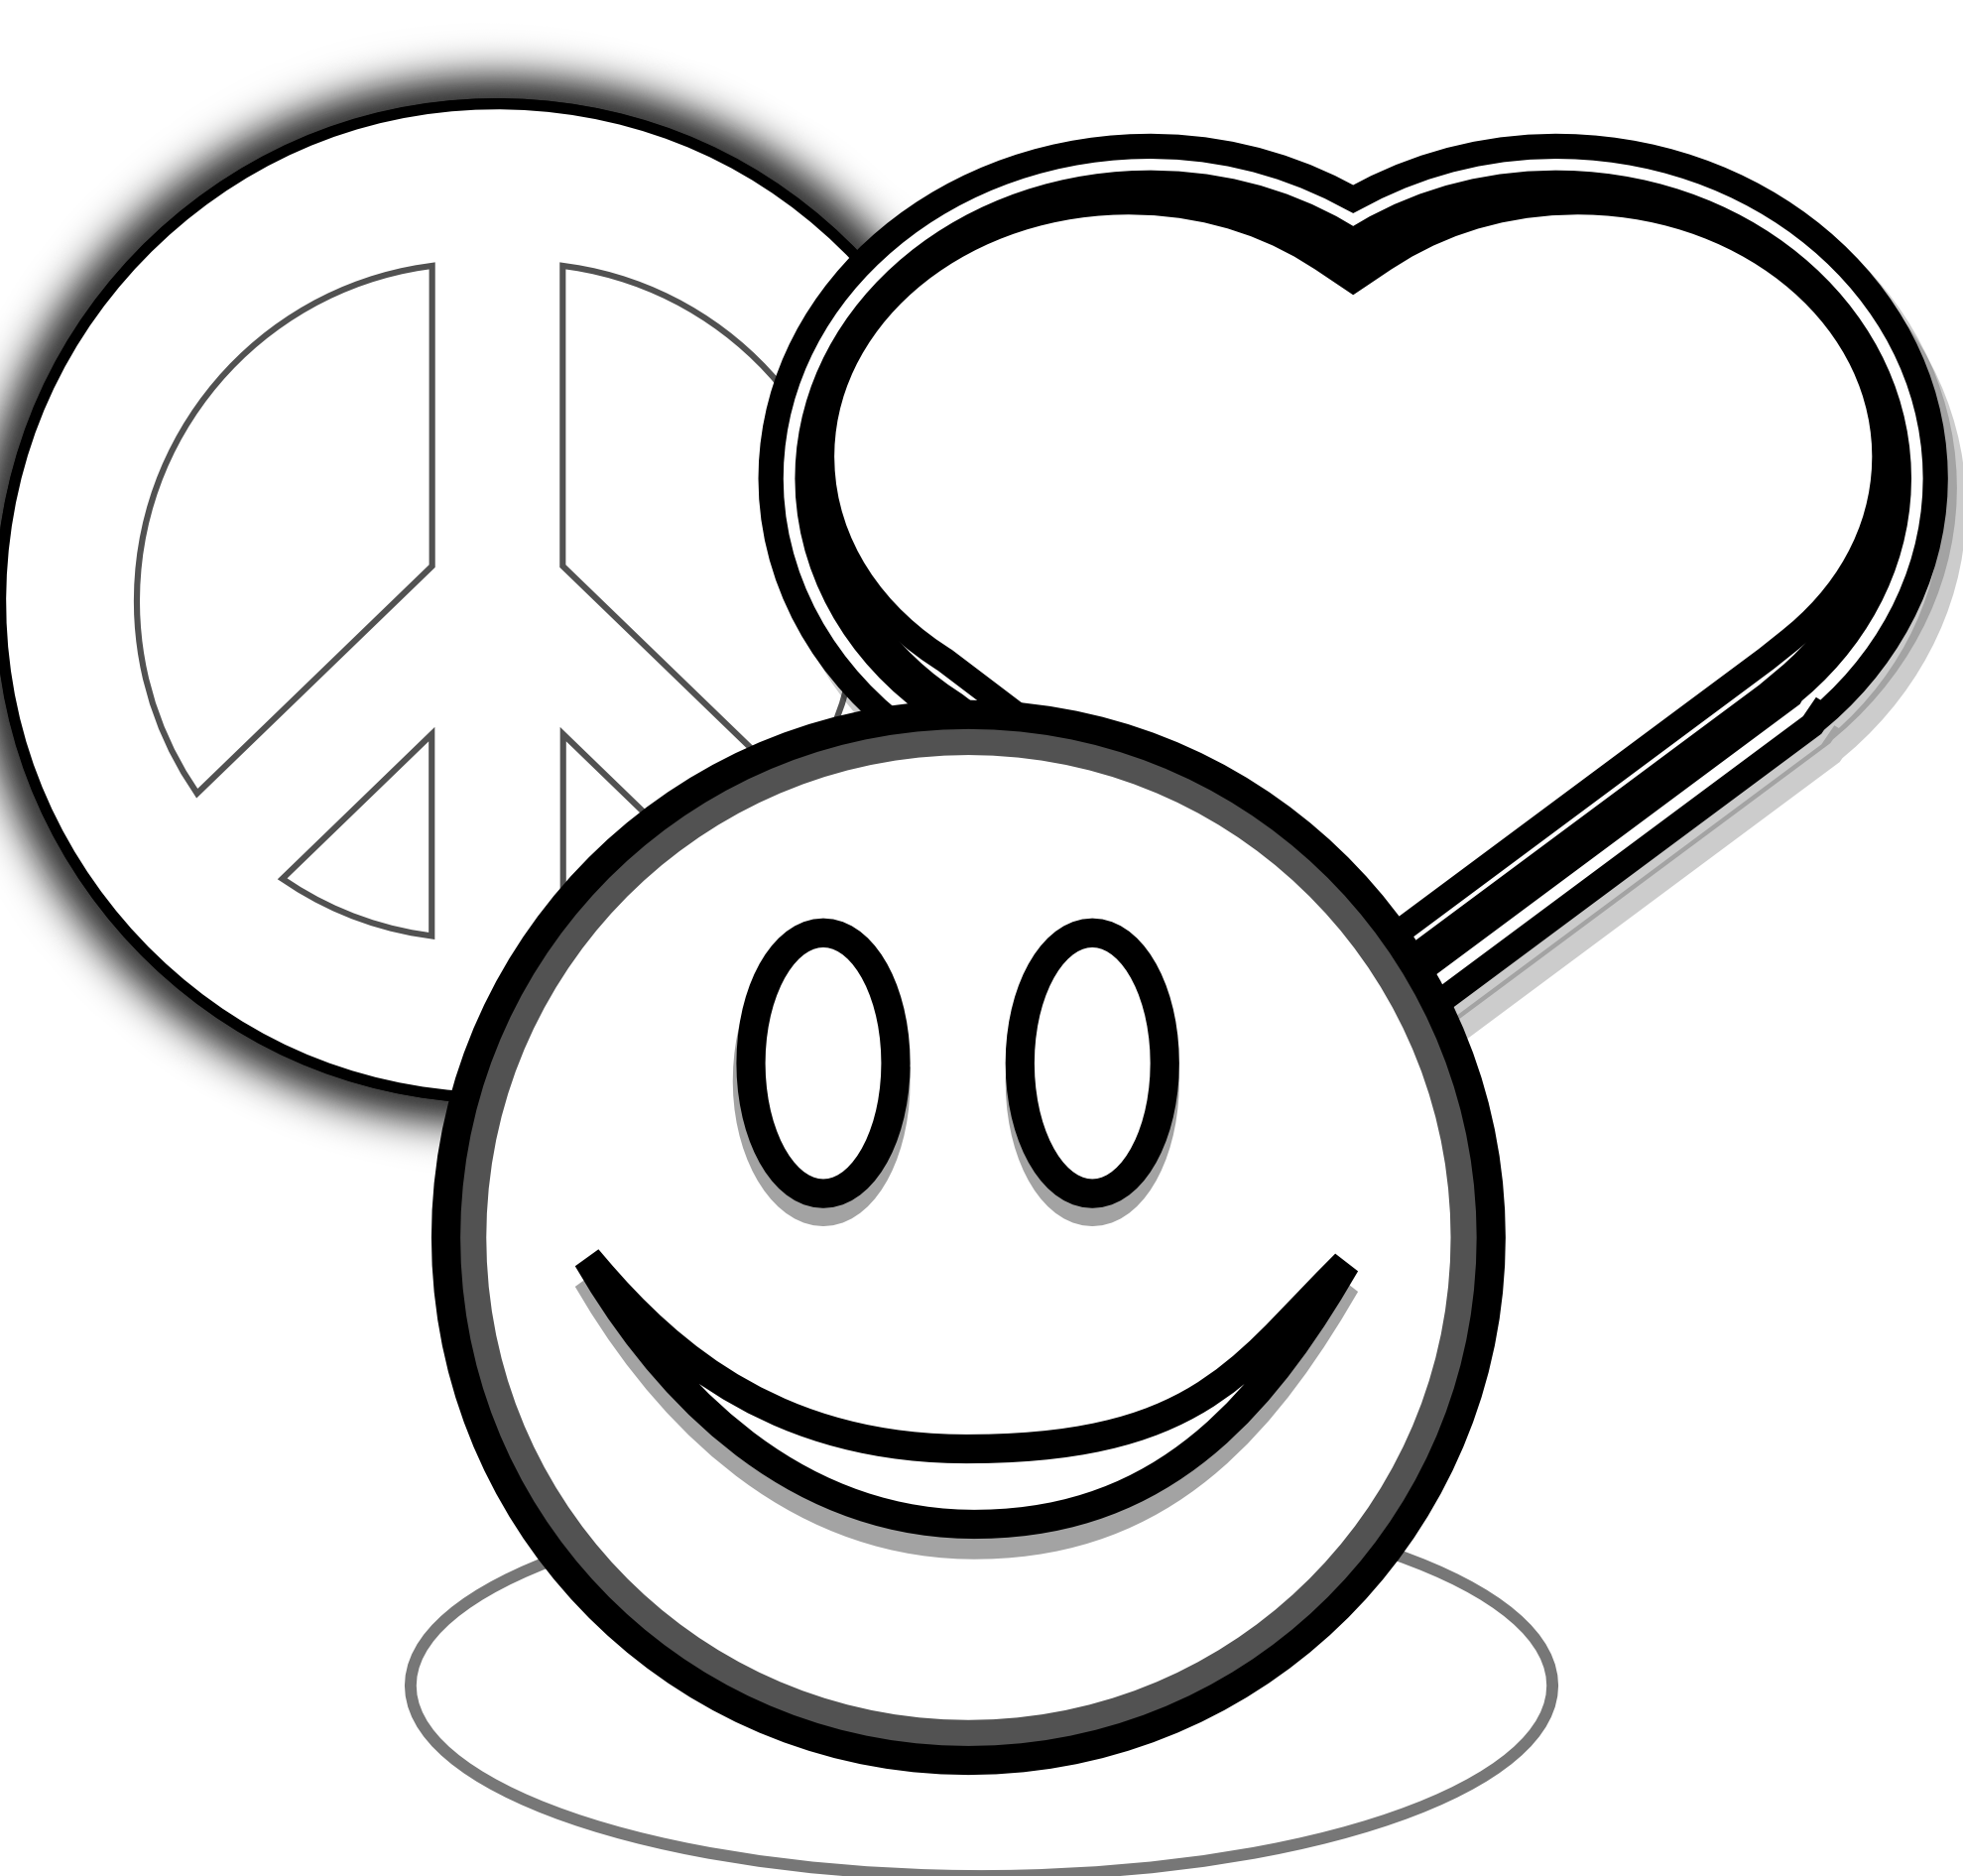 peace sign flower coloring pages